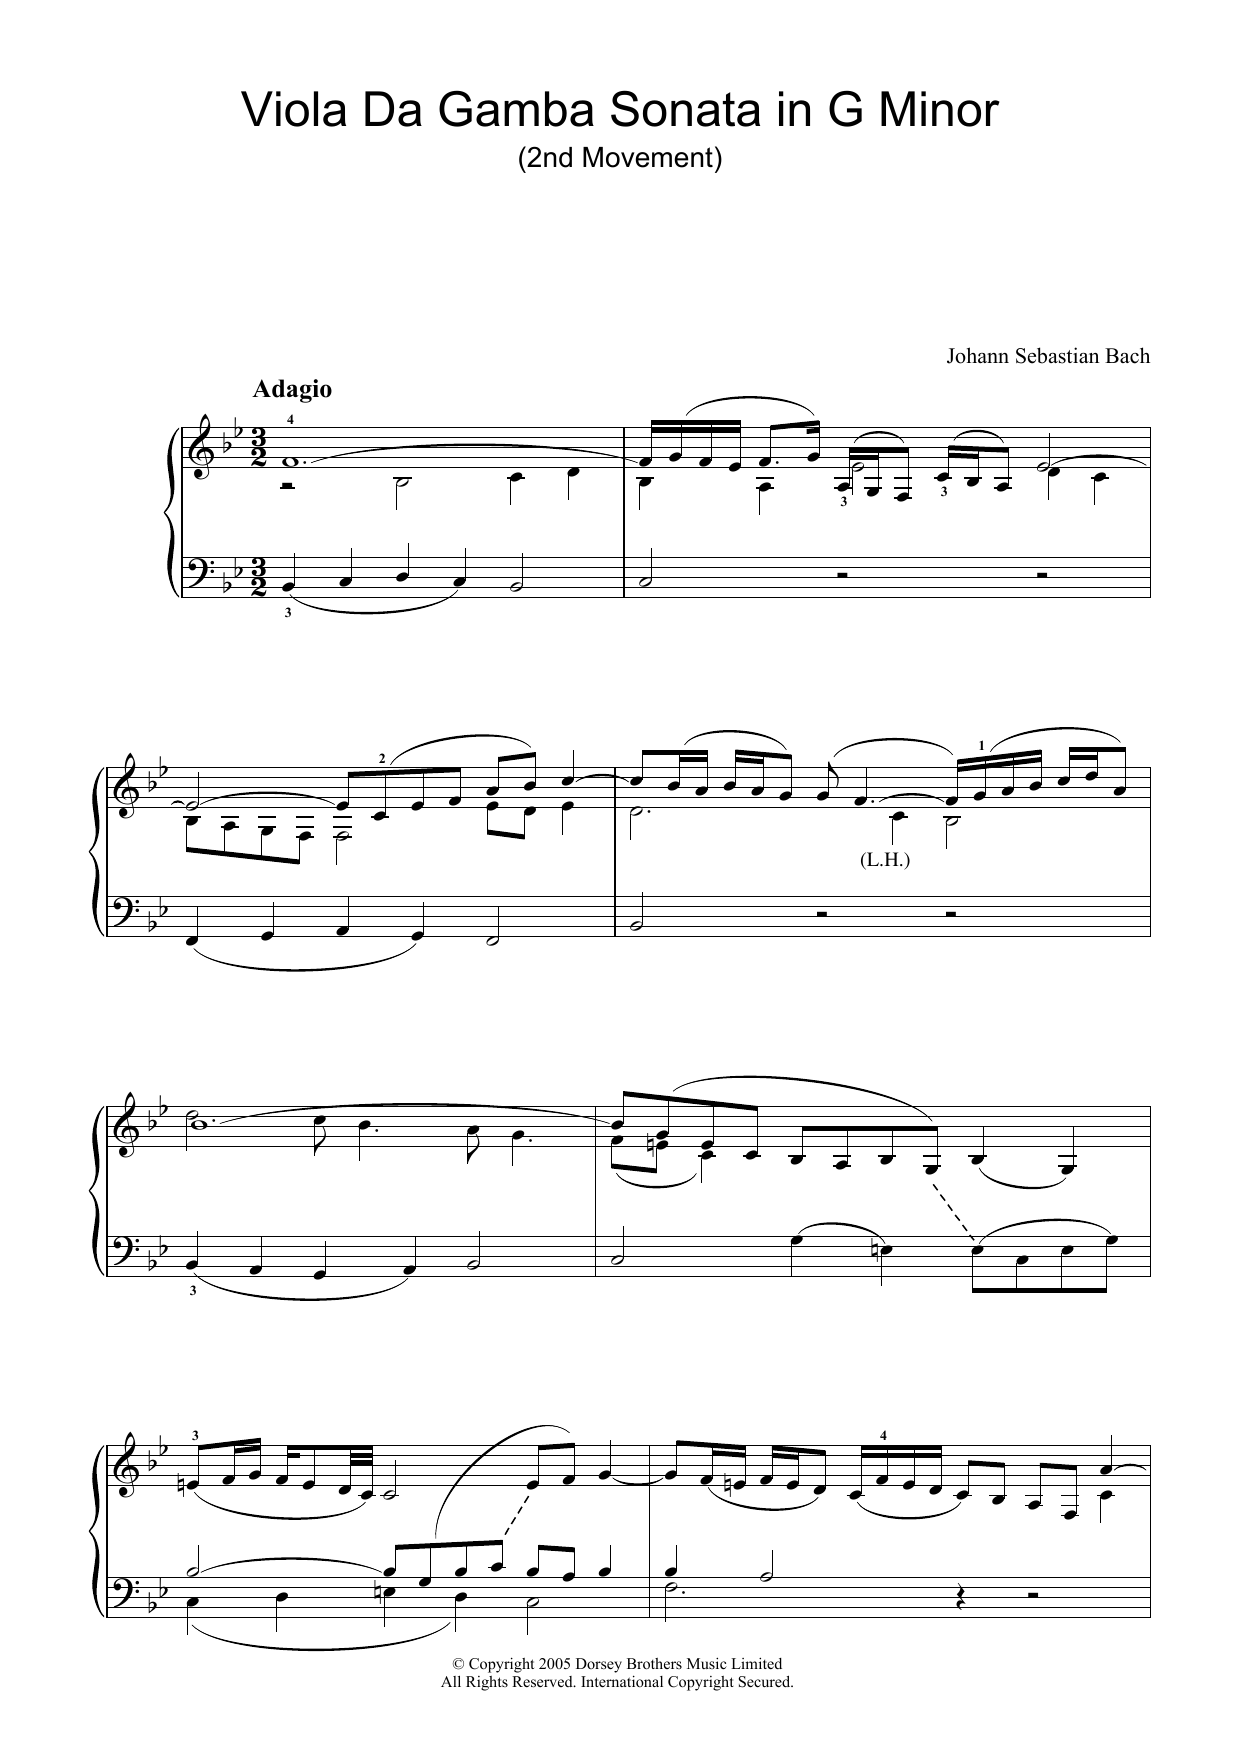 J.S. Bach Viola da Gamba Sonata In G Minor (2nd Movement) sheet music preview music notes and score for Piano including 3 page(s)